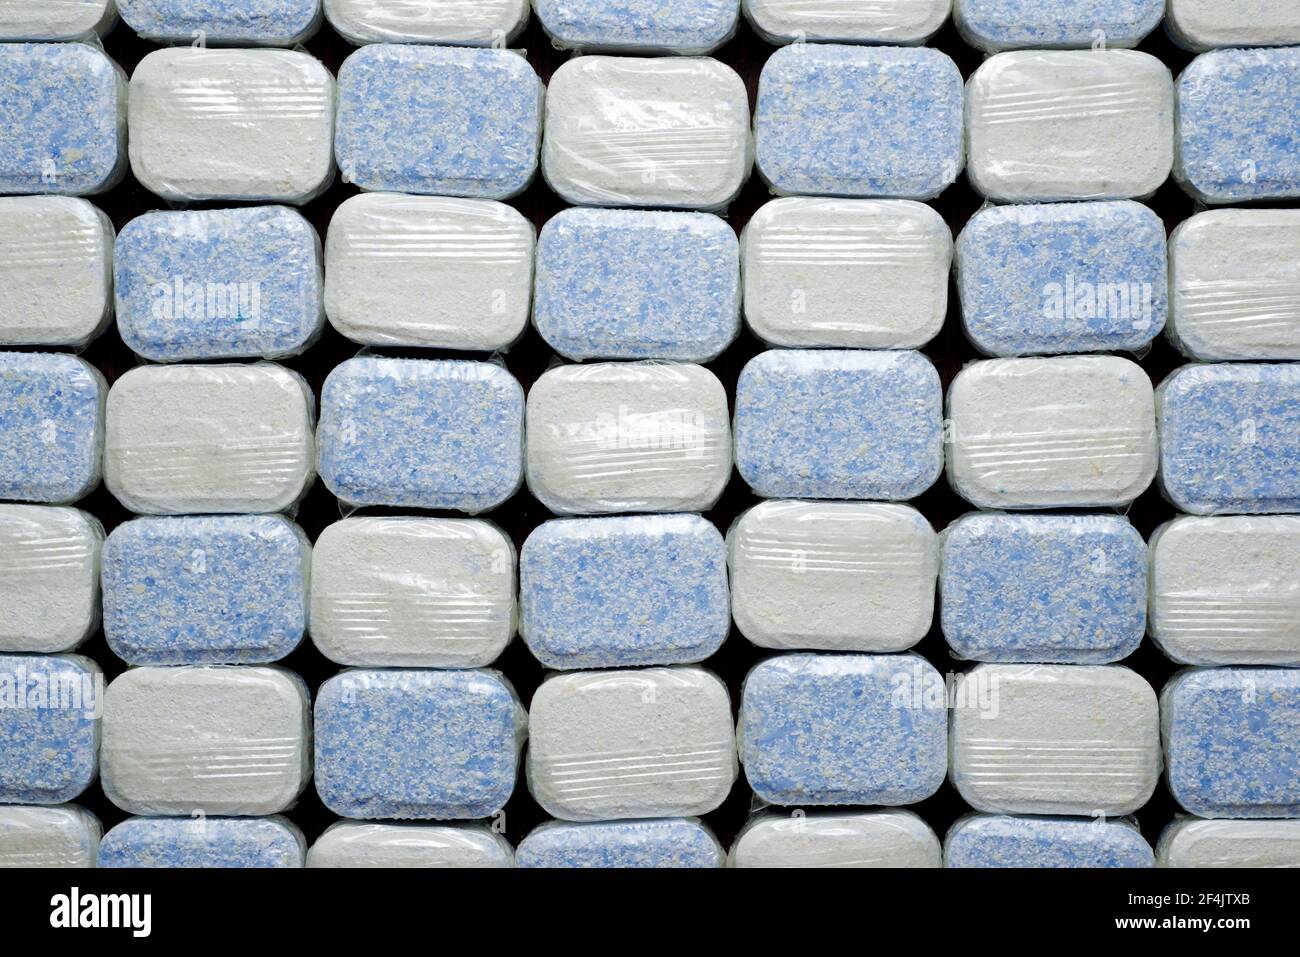 Close-up of a group of dishwasher detergent tablets. Stock Photo